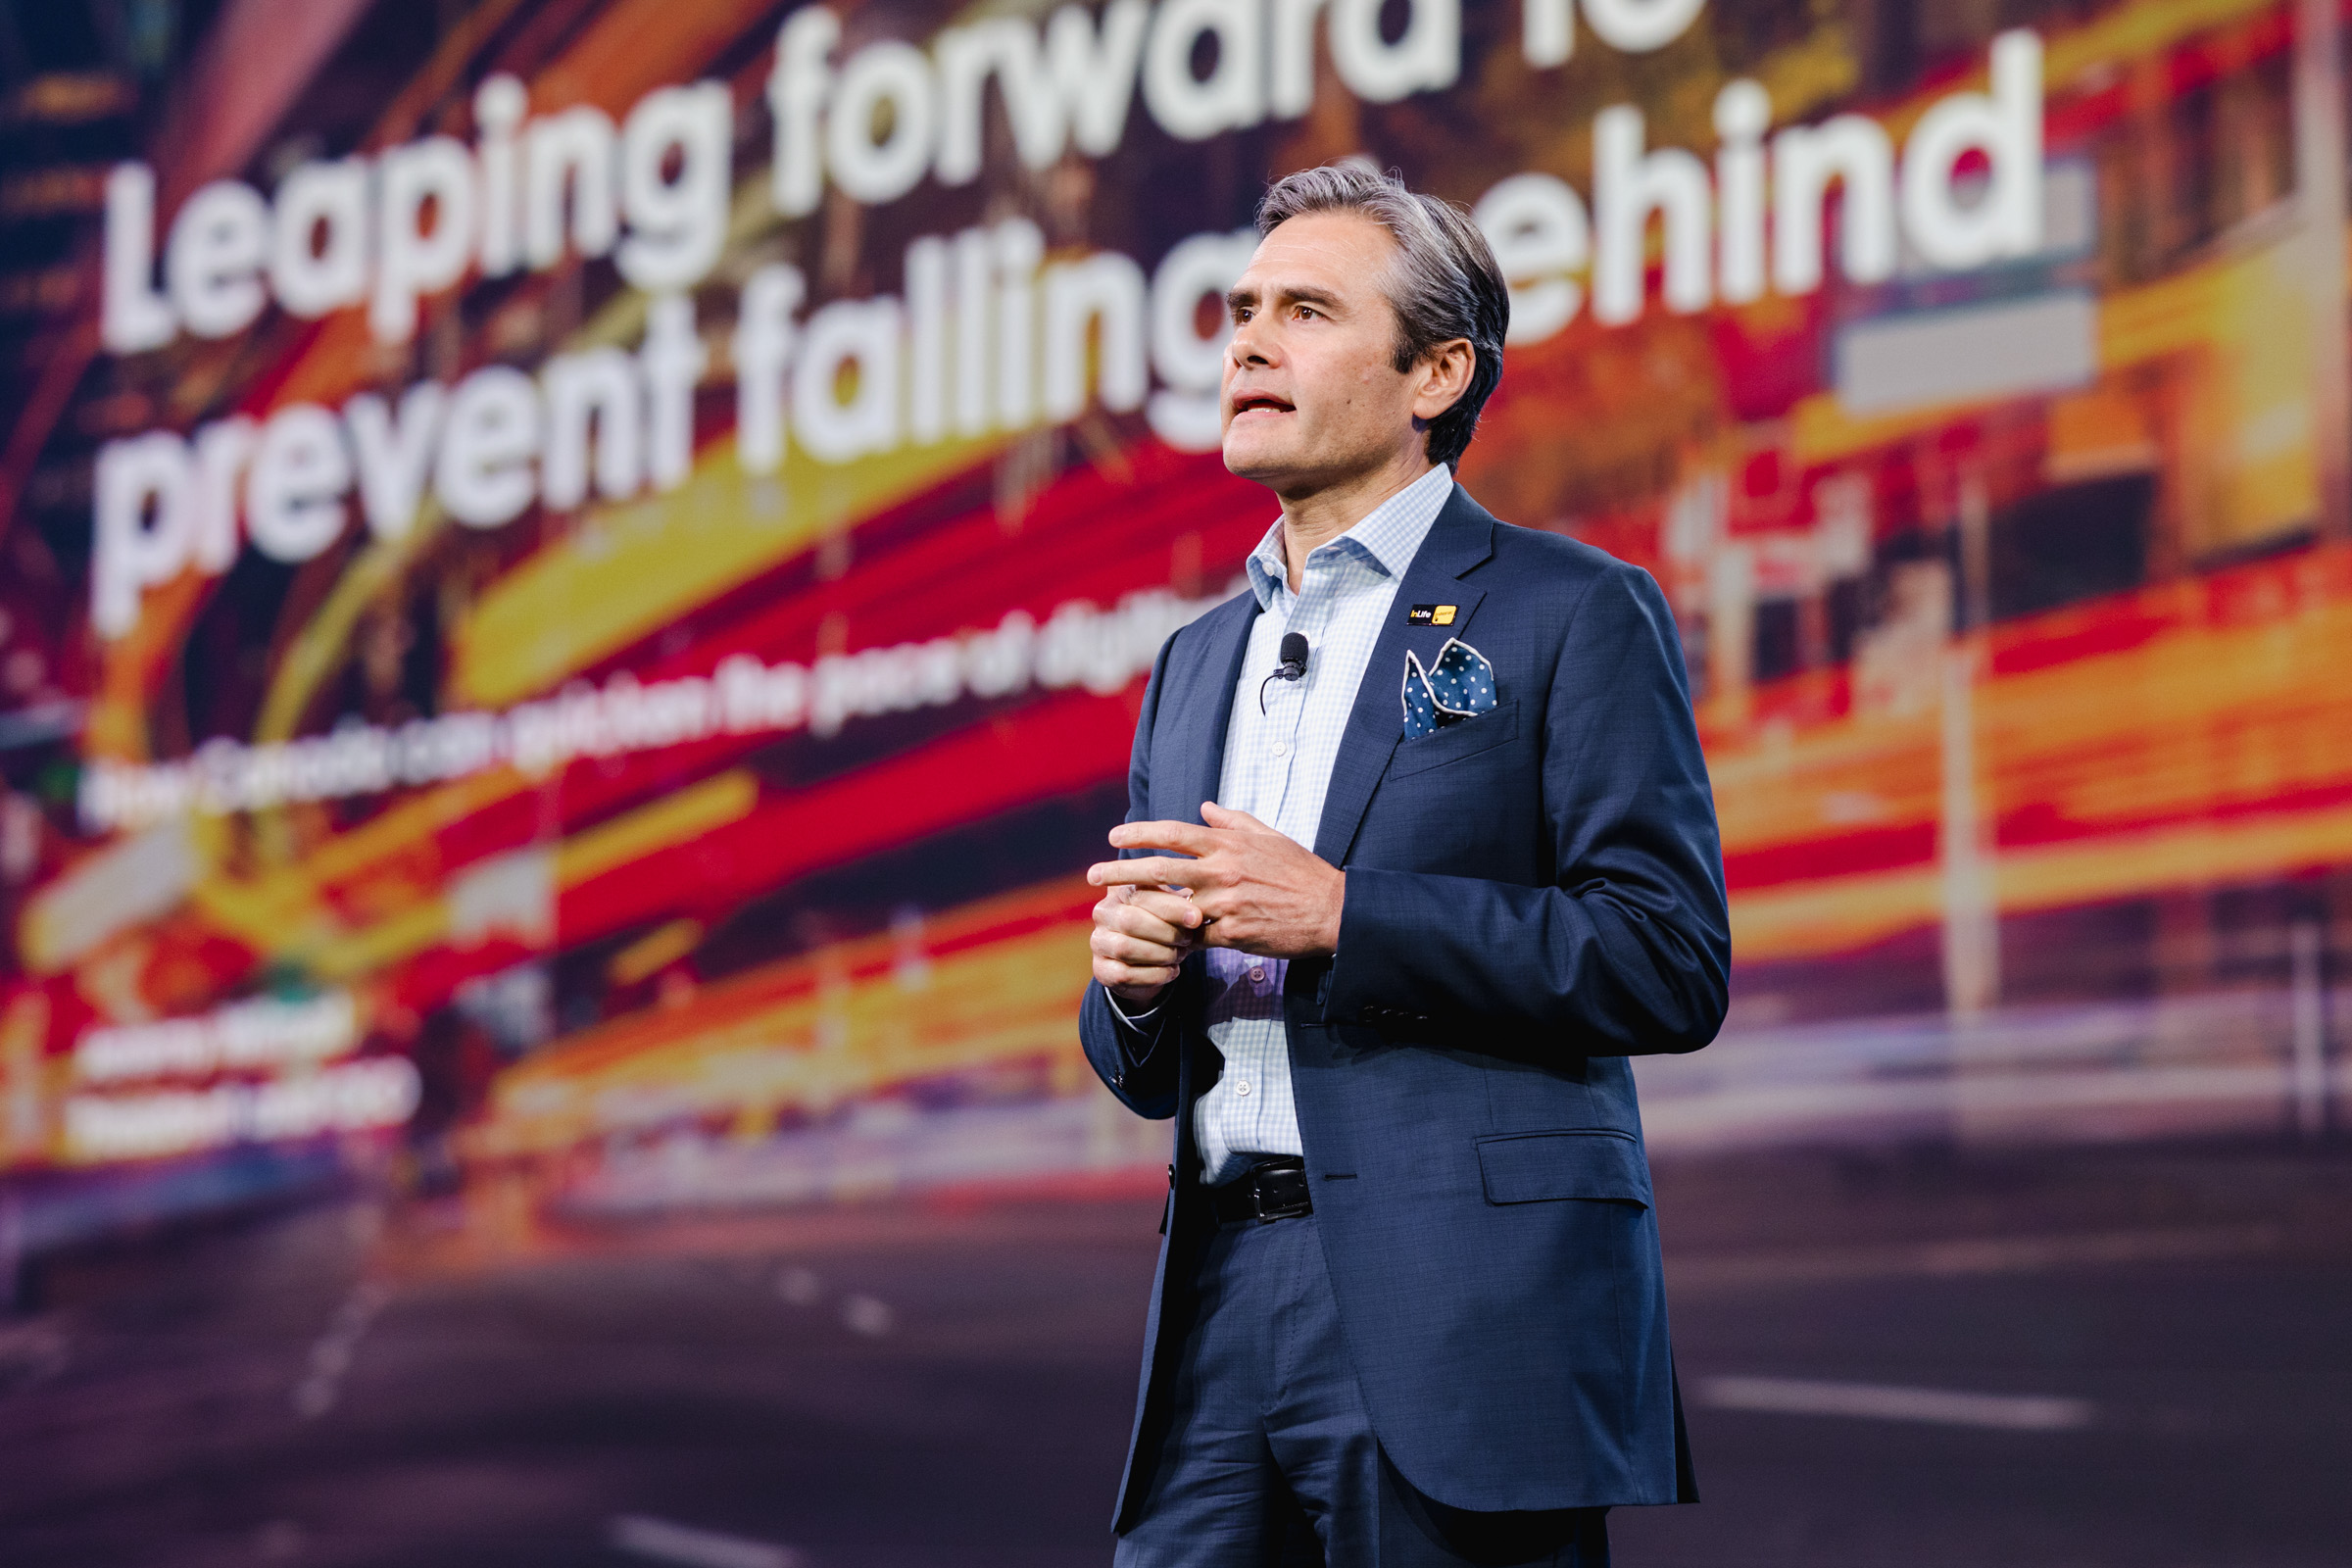 Man in a suit speaking on stage with a blurred background displaying the text, "Leaping forward to prevent falling behind." Captured through expert event photography techniques.